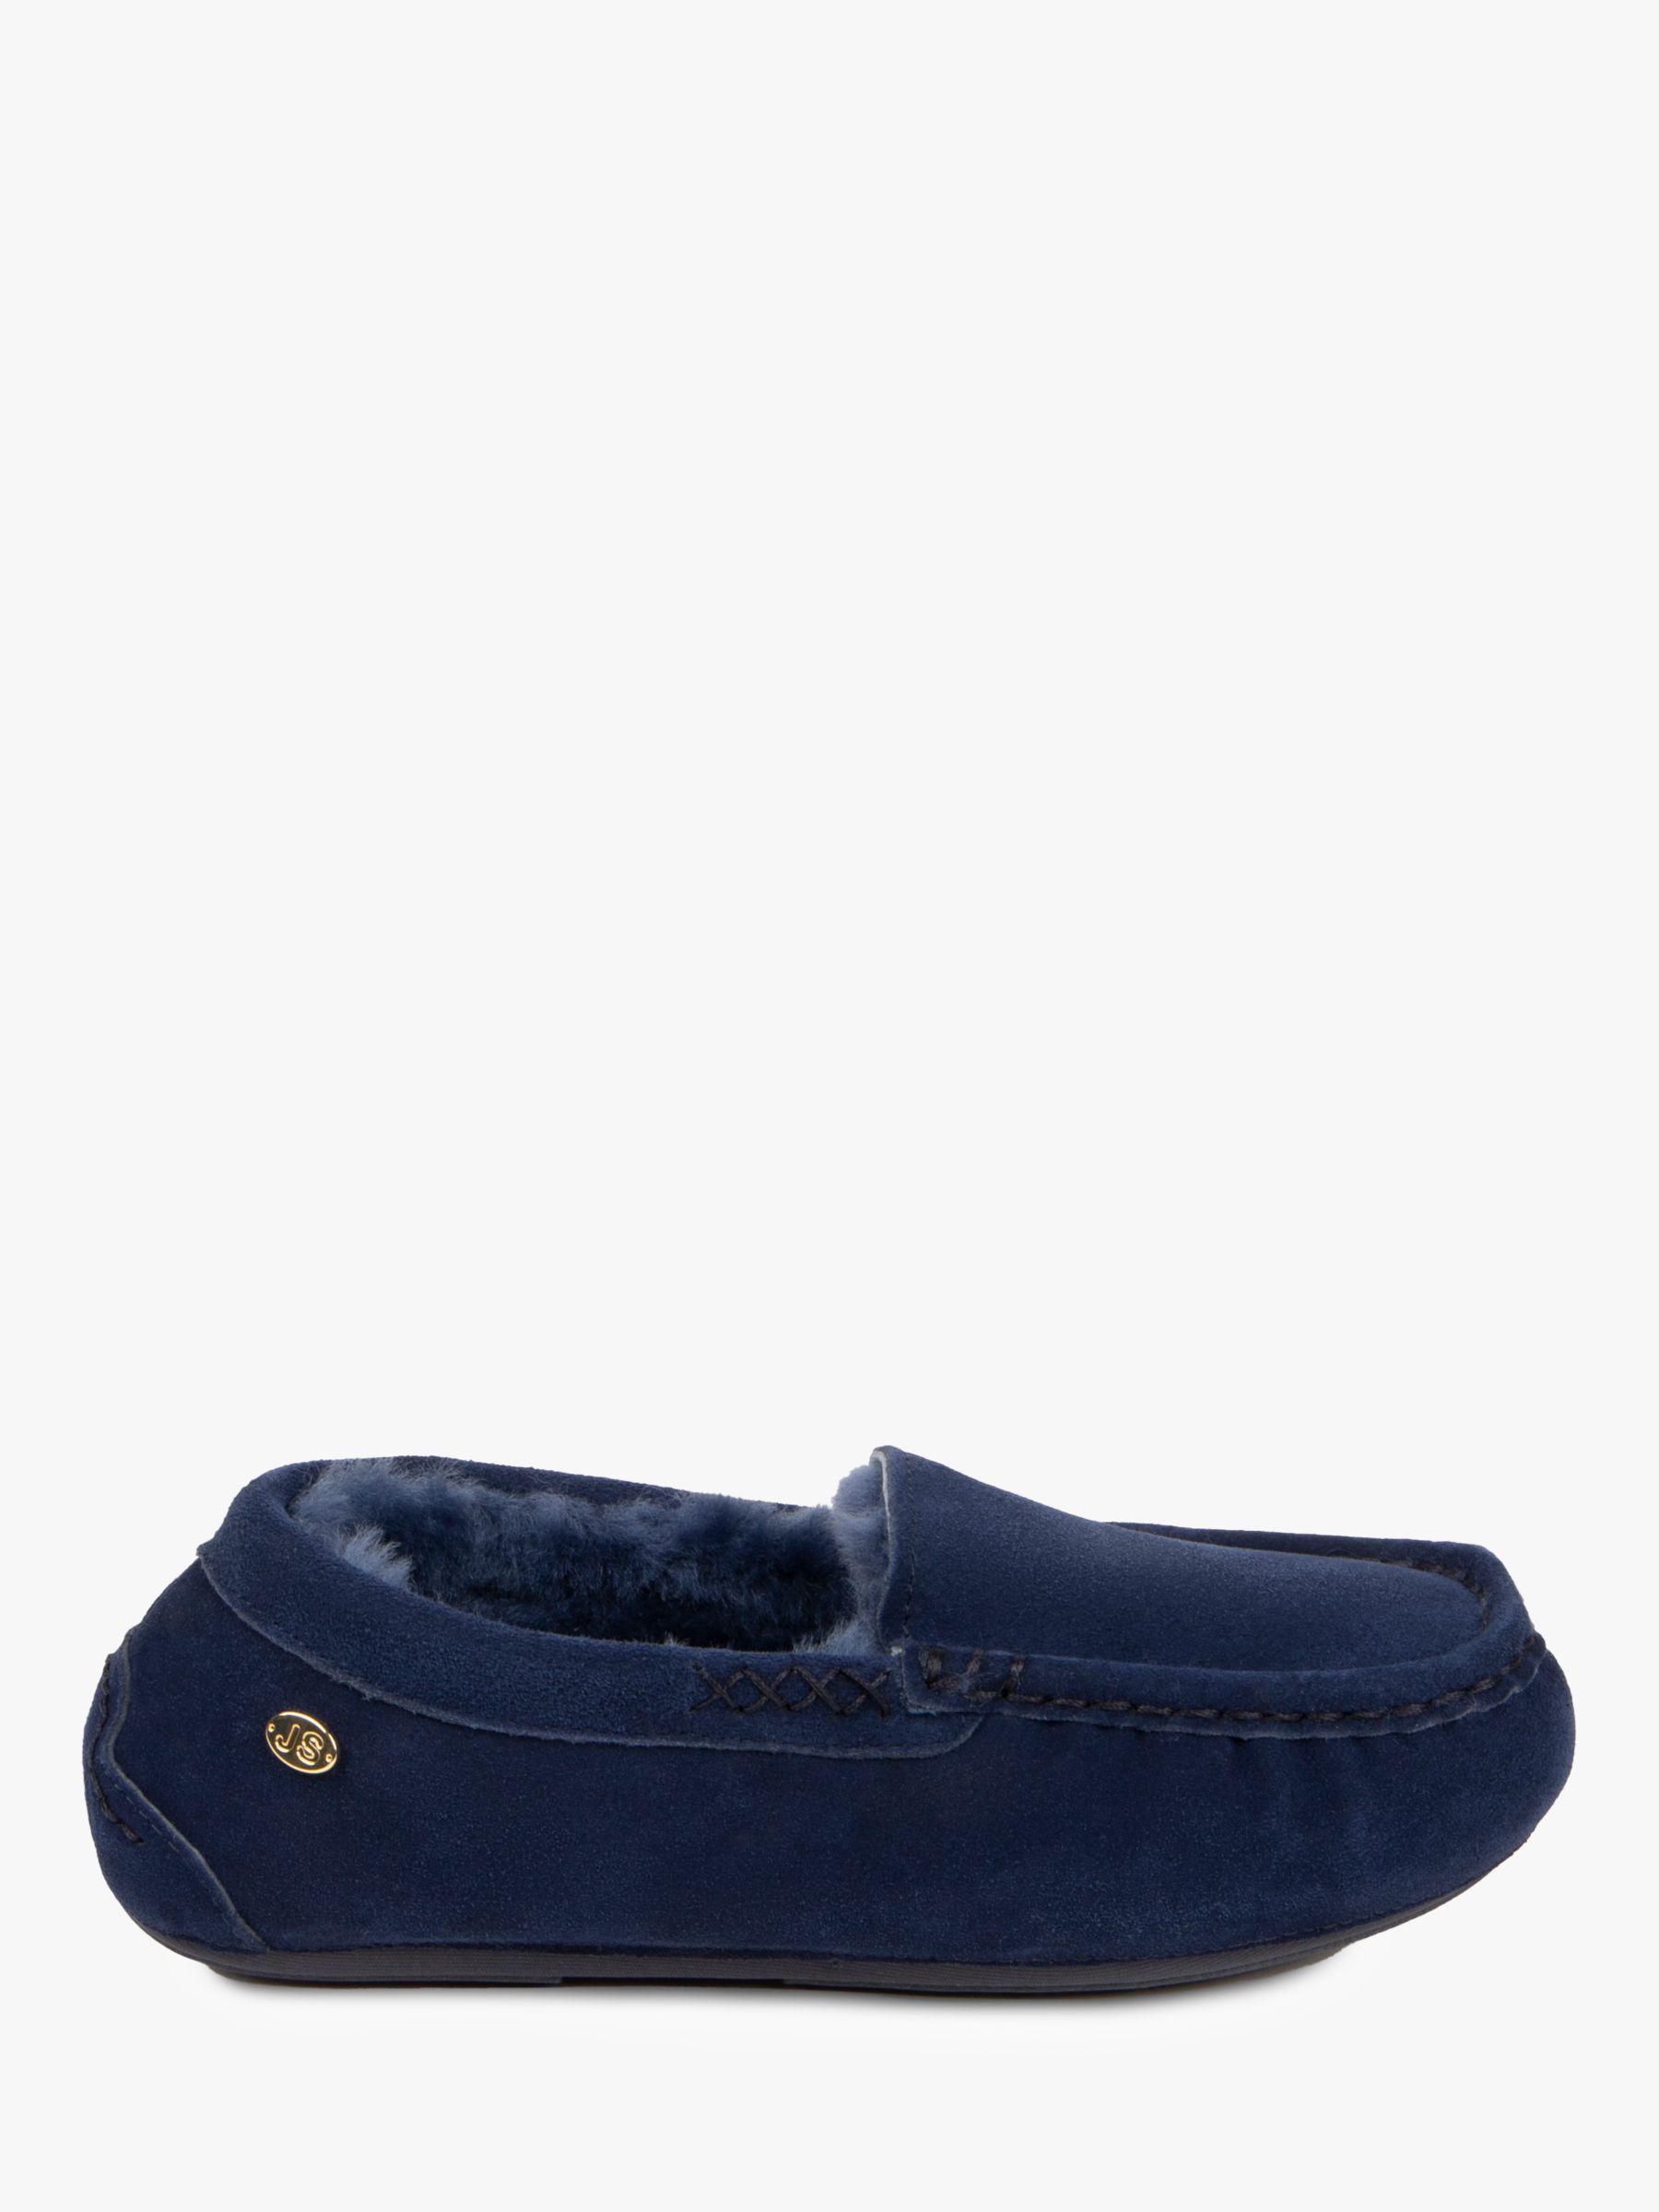 Just Sheepskin Sophie Suede Moccasin Slippers, Navy at John Lewis ...